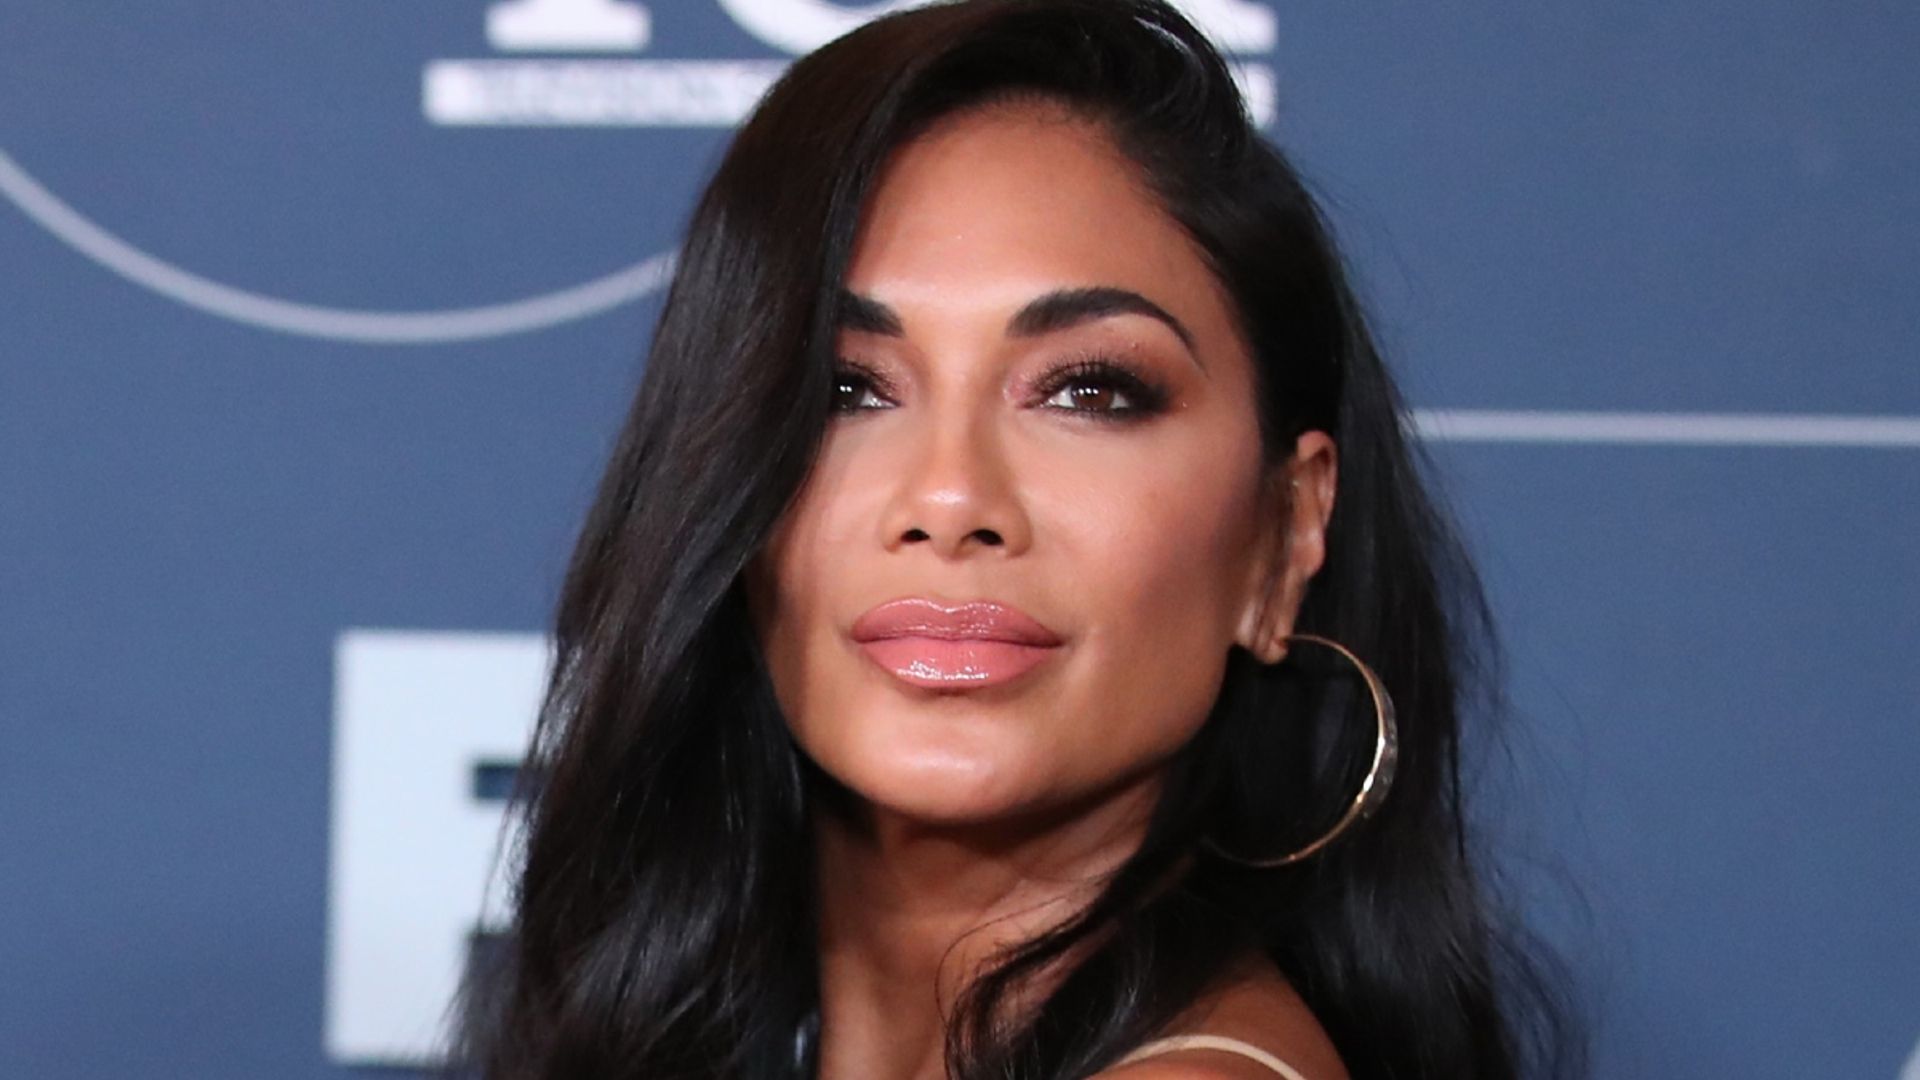 Nicole Scherzinger shows off her flexibility in black top and